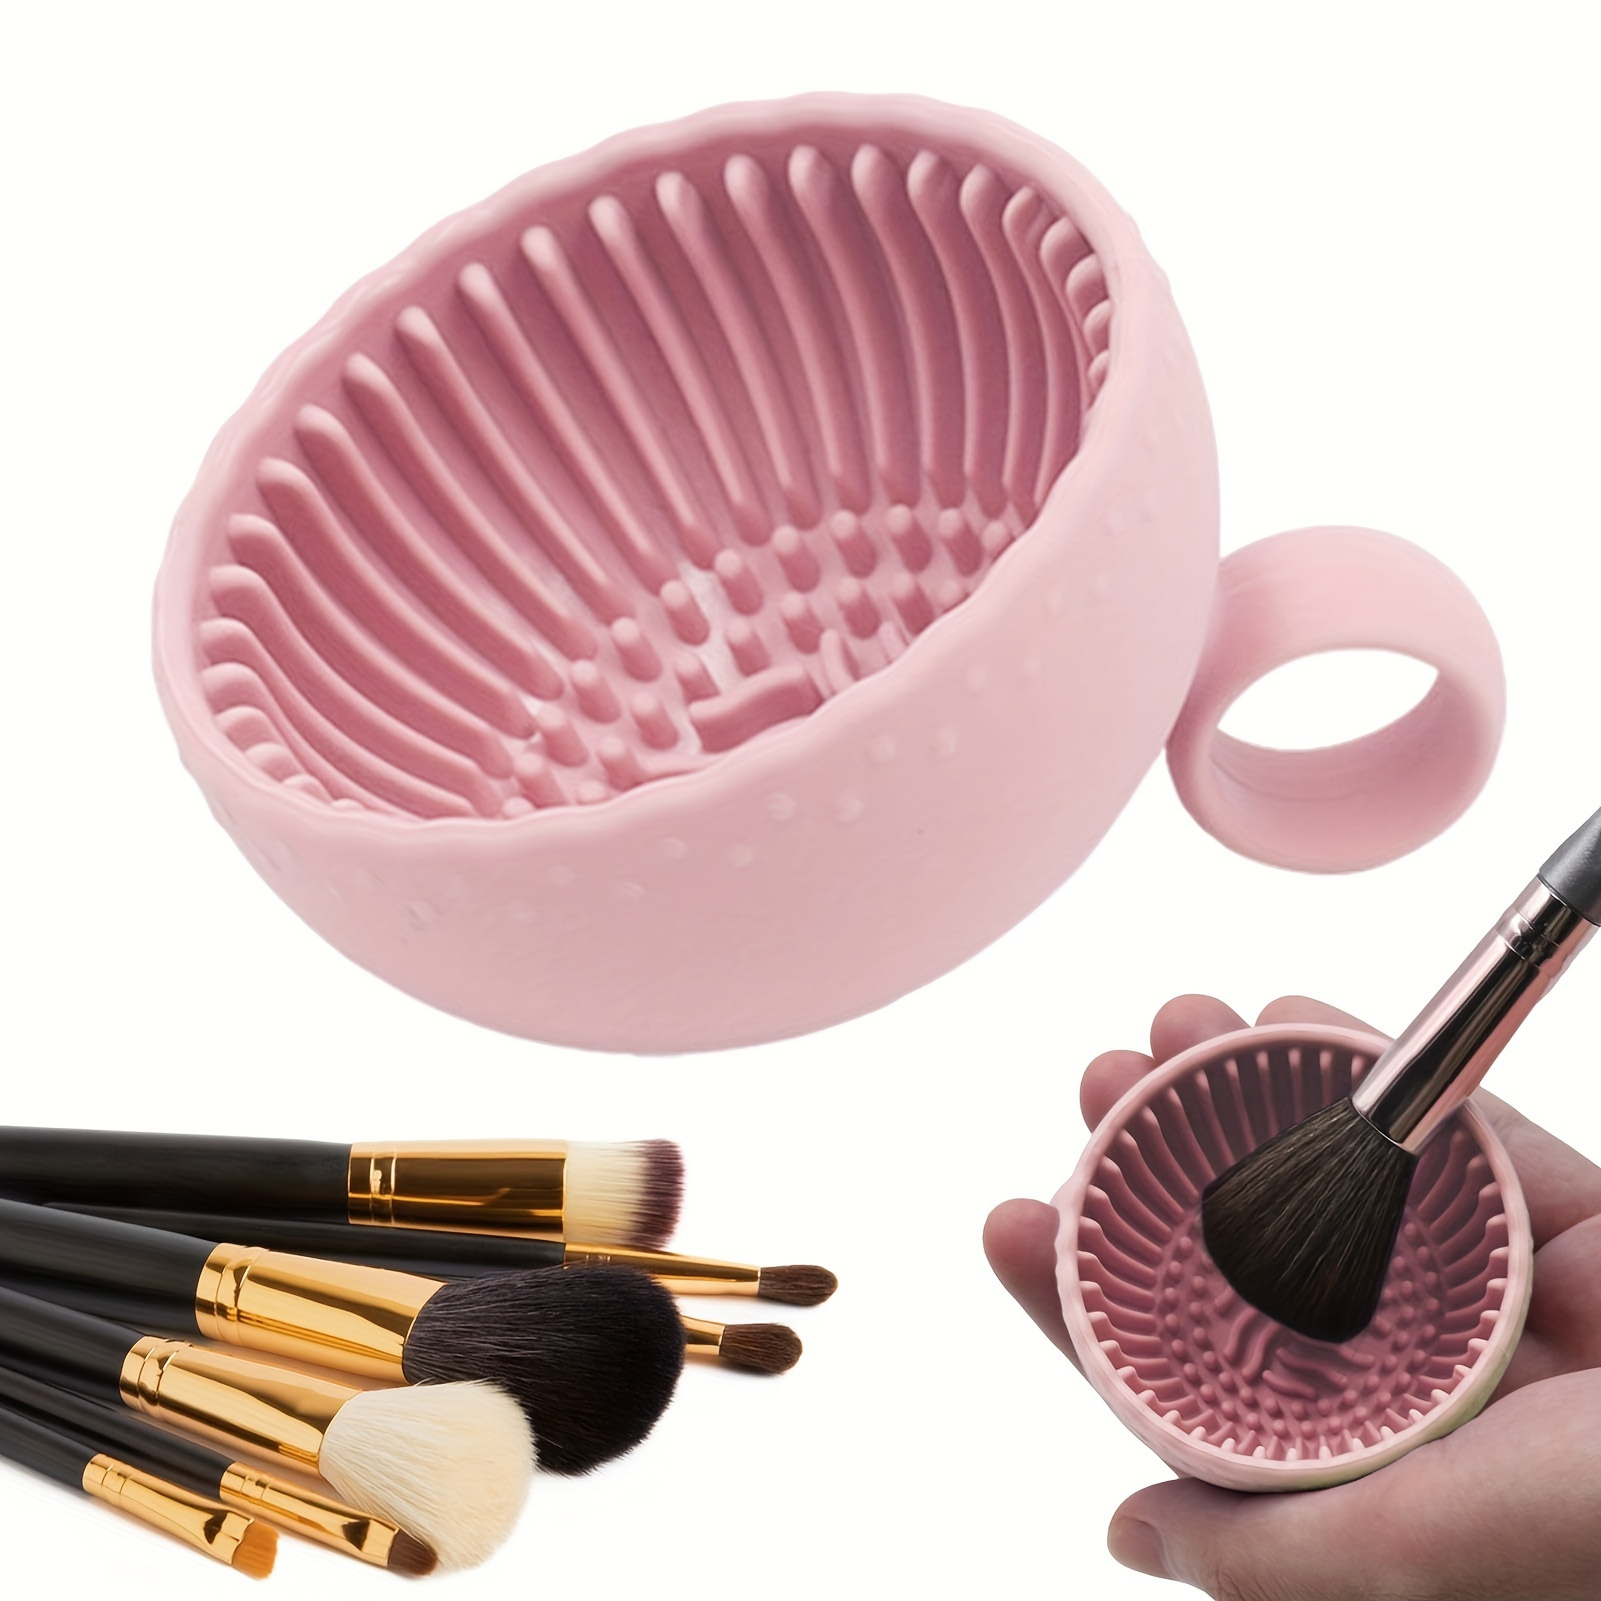 

1pc Makeup Brush Cleaner Bowl, Solid Color Silicone Scrubber Pad, Silicone Makeup Brush Cleaning Bowl, Brush Cleaning Mat For Cleaning Eyebrow Facial Brow Blush Eye Brushes